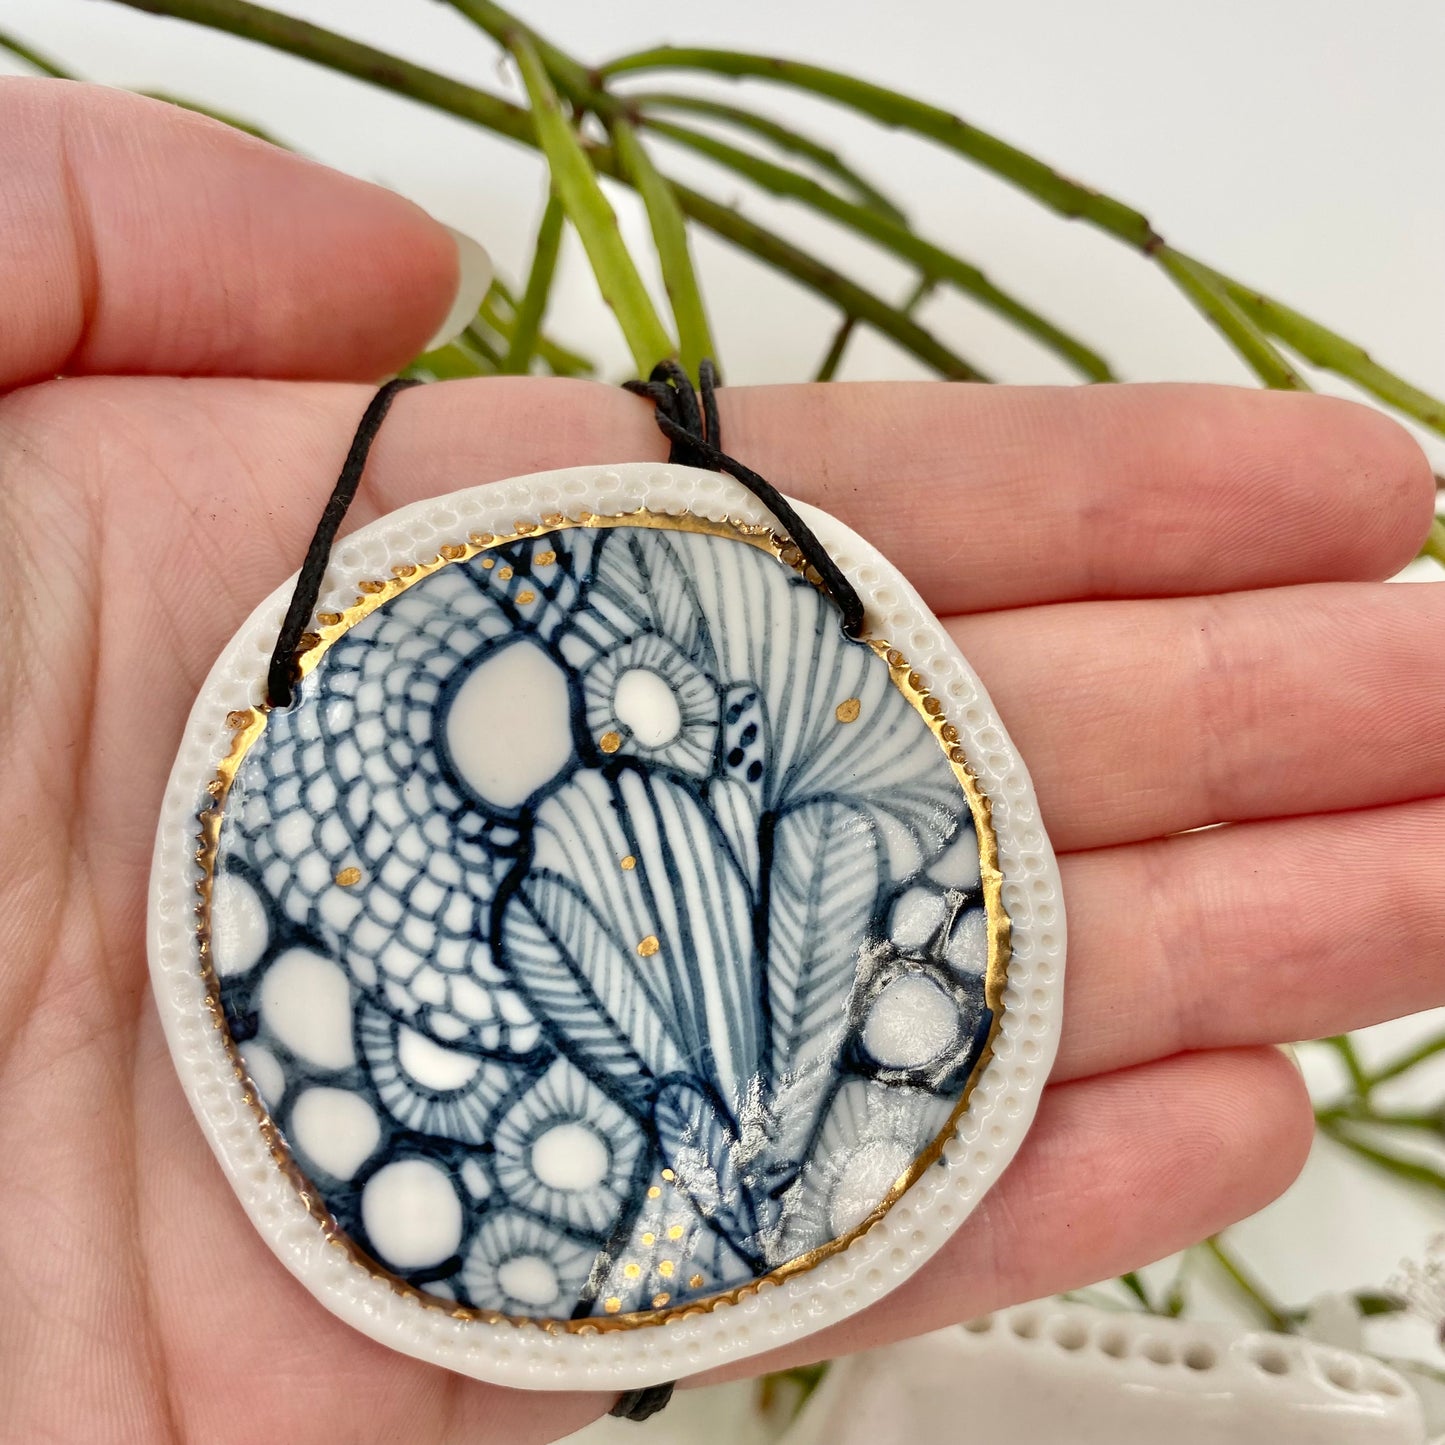 Porcelain Pendant Painted by Hand with Gold Details